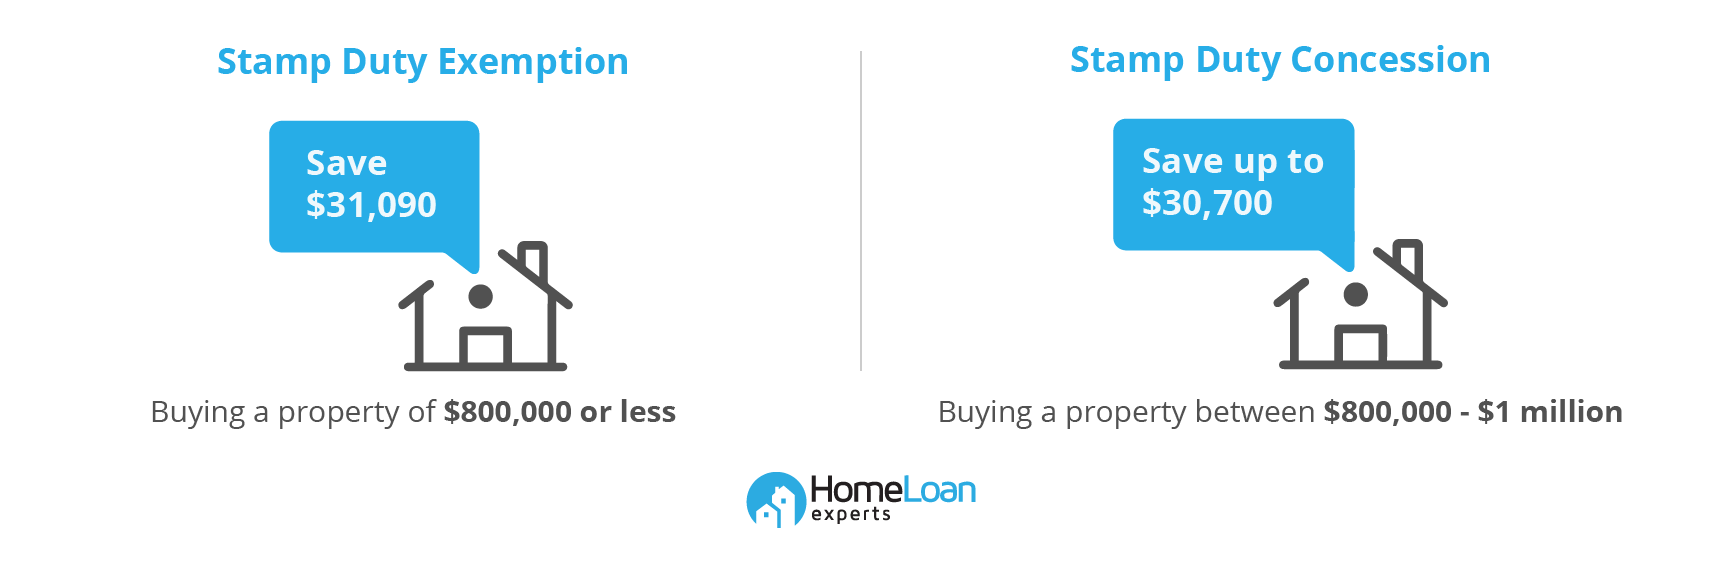 Savings from stamp duty exemption and concession for buying a property up to  million in NSW are shown side by side